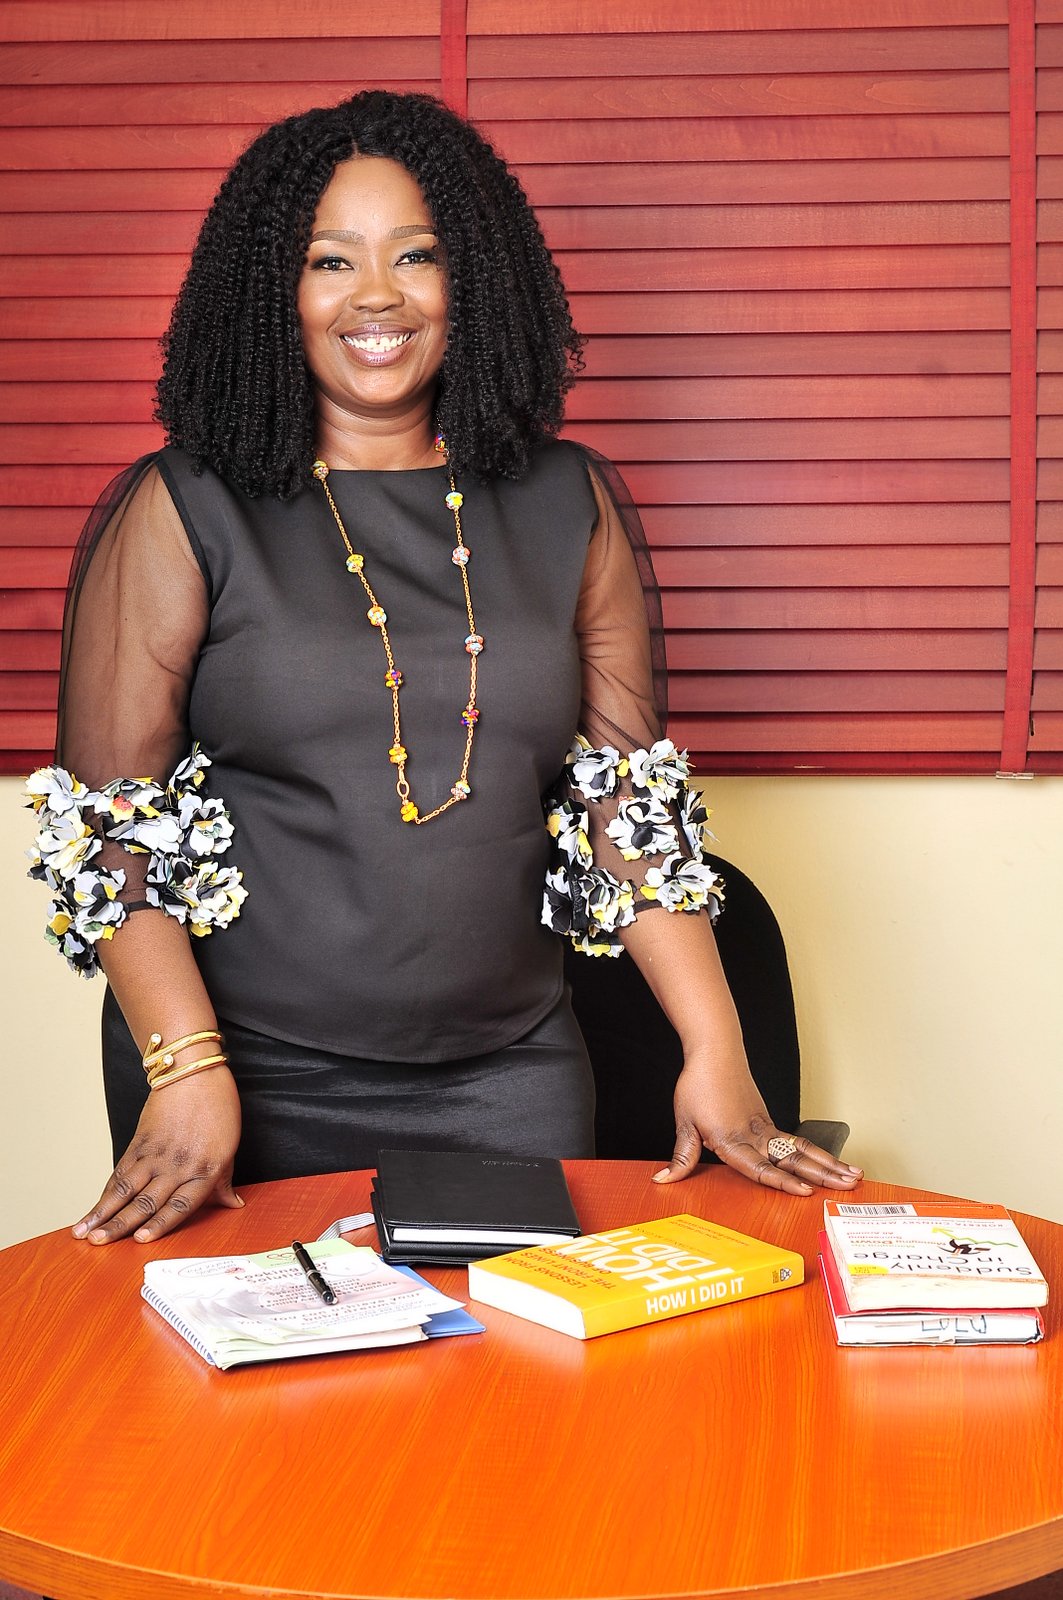 LagosMums mums of the month - Toyin Ogunmade